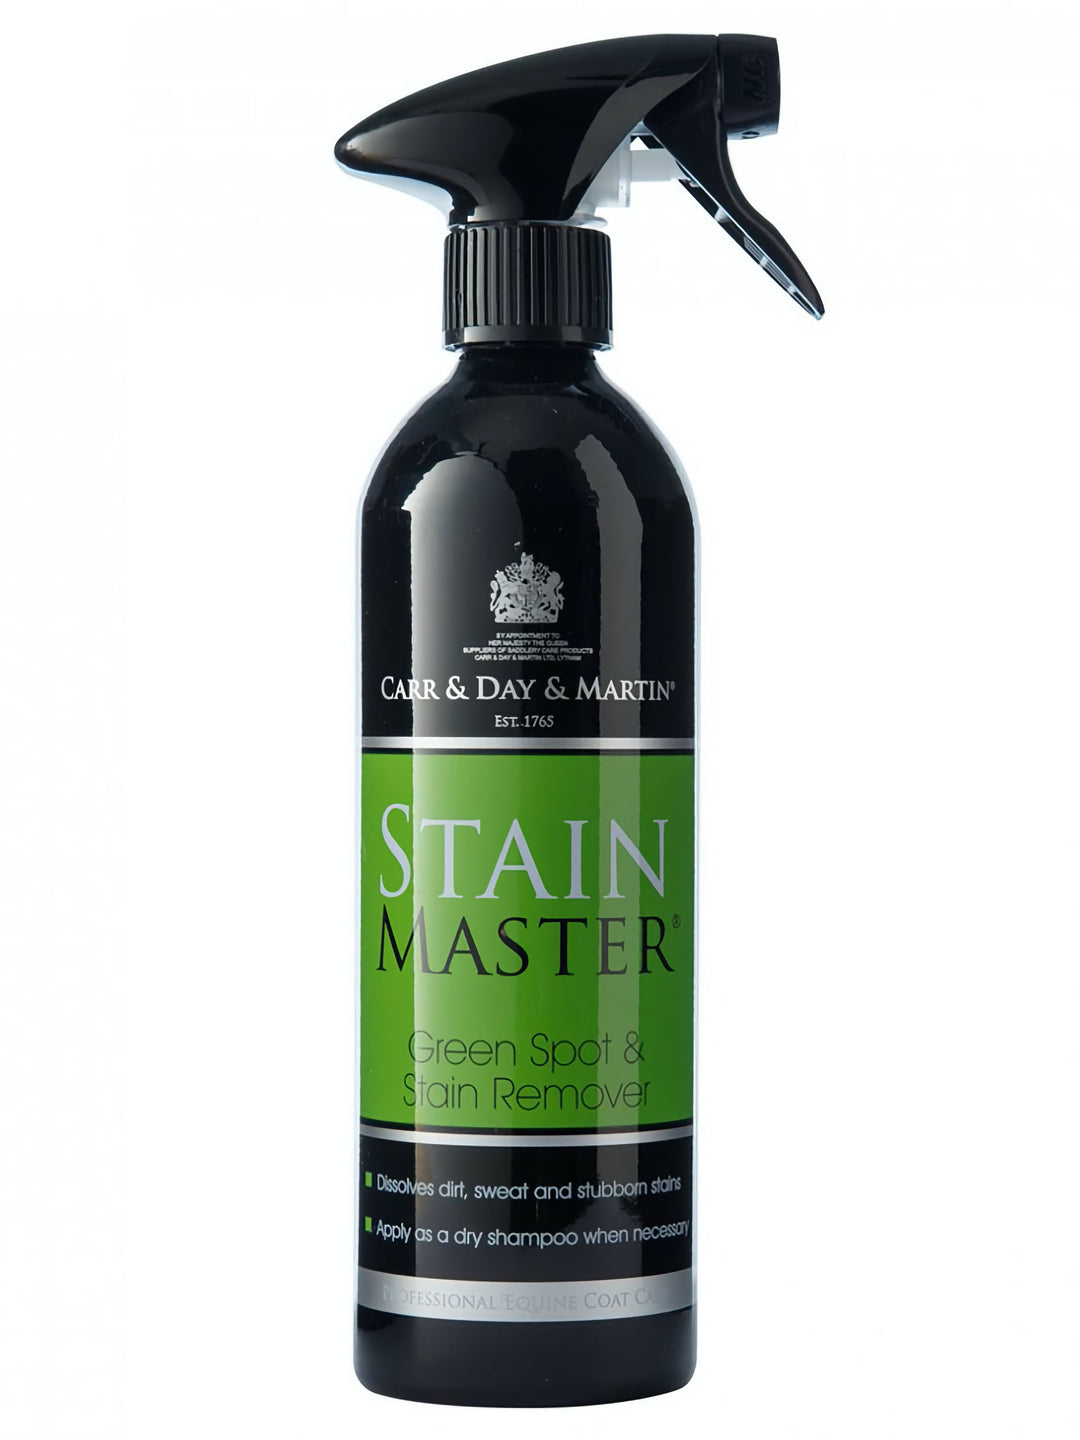 Carr & Day & Martin - Stainmaster Green Spot & Stain Remover